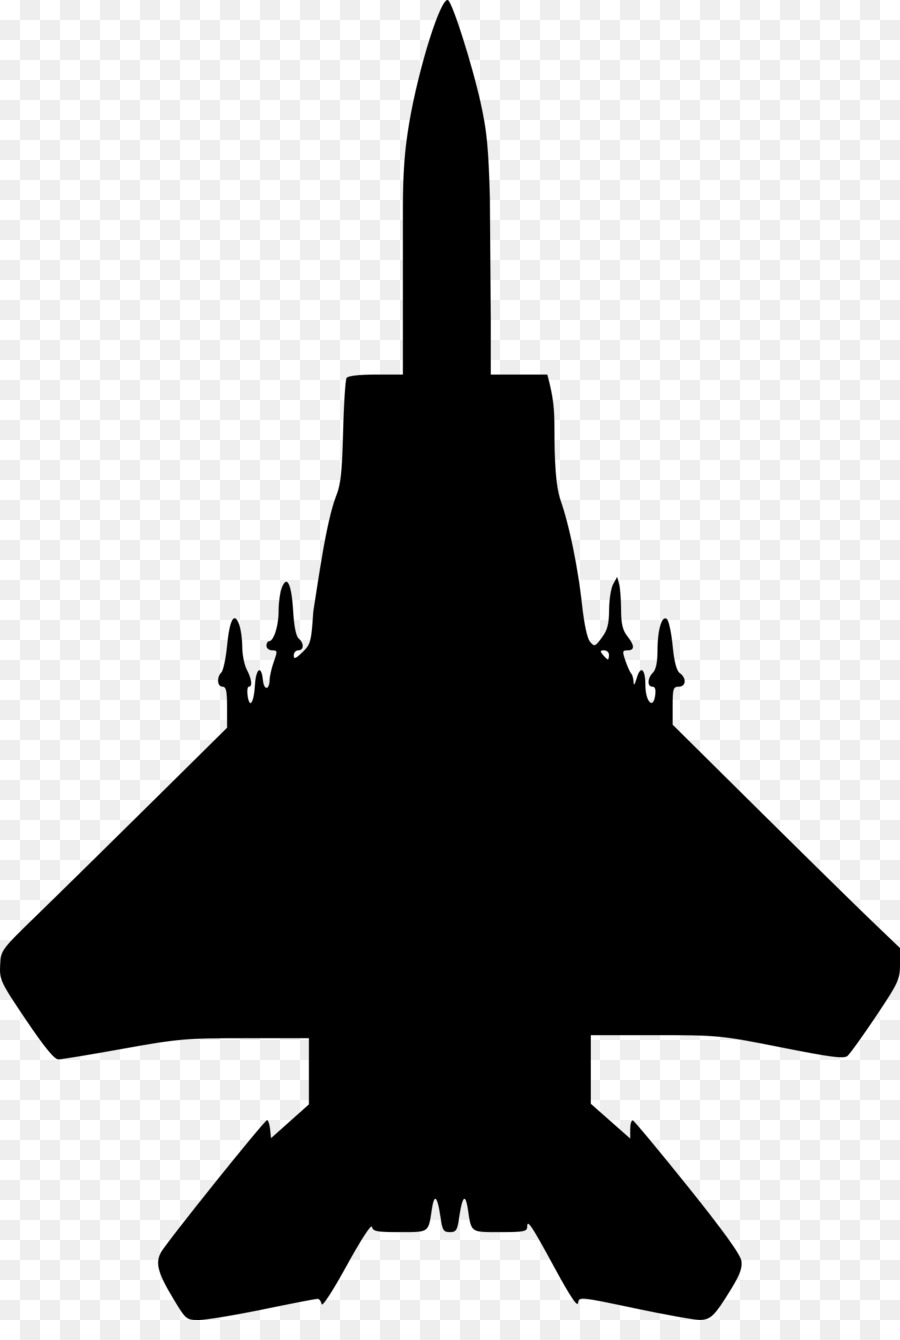 Airplane McDonnell Douglas F-15 Eagle General Dynamics F-16 Fighting Falcon Fighter aircraft - jet png download - 1636*2400 - Free Transparent Airplane png Download.